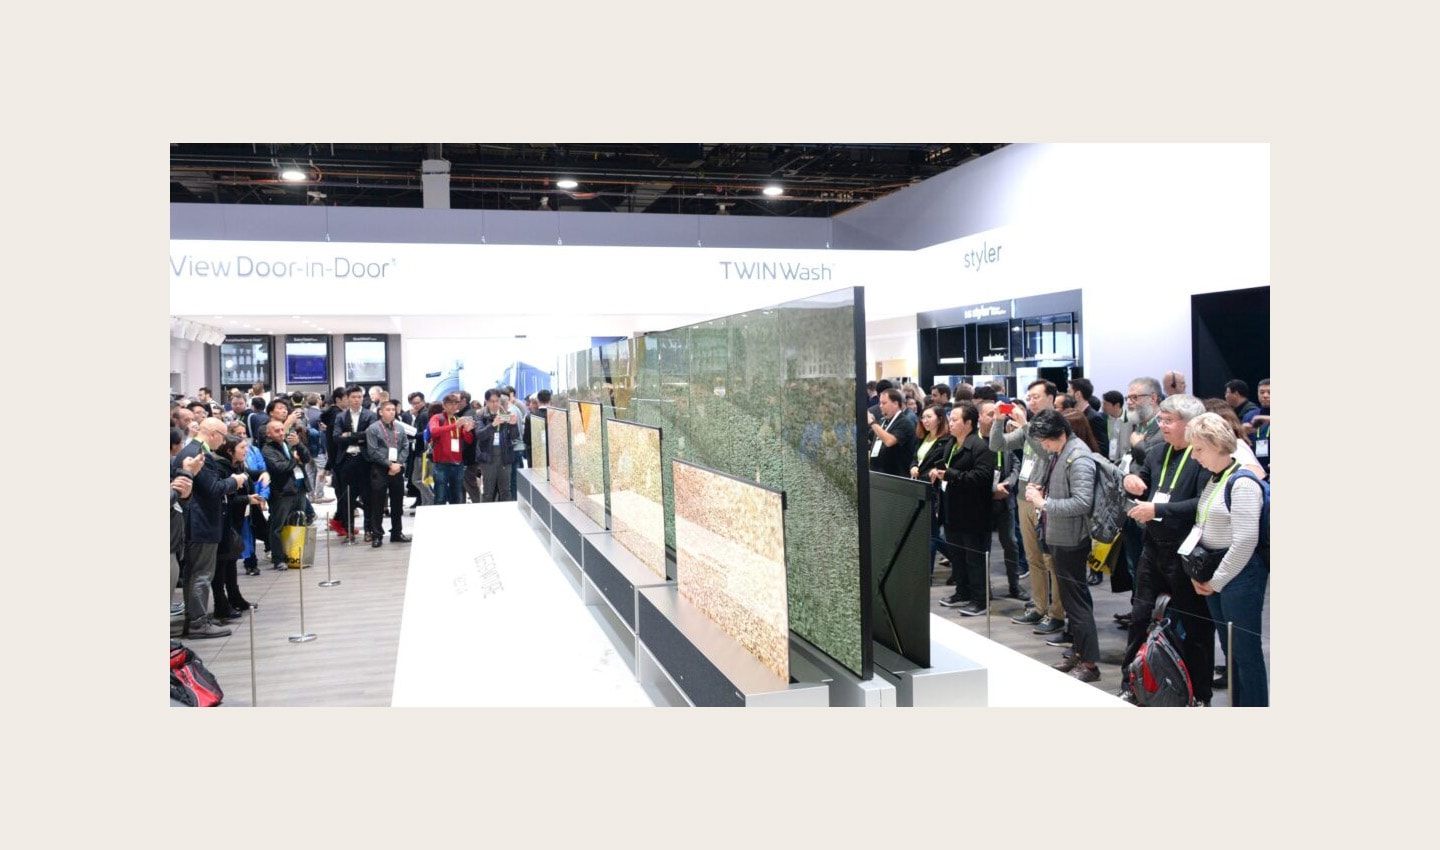 Another view of LG SIGNATURE OLED TVR display zone with CES visitors viewing the display and taking pictures